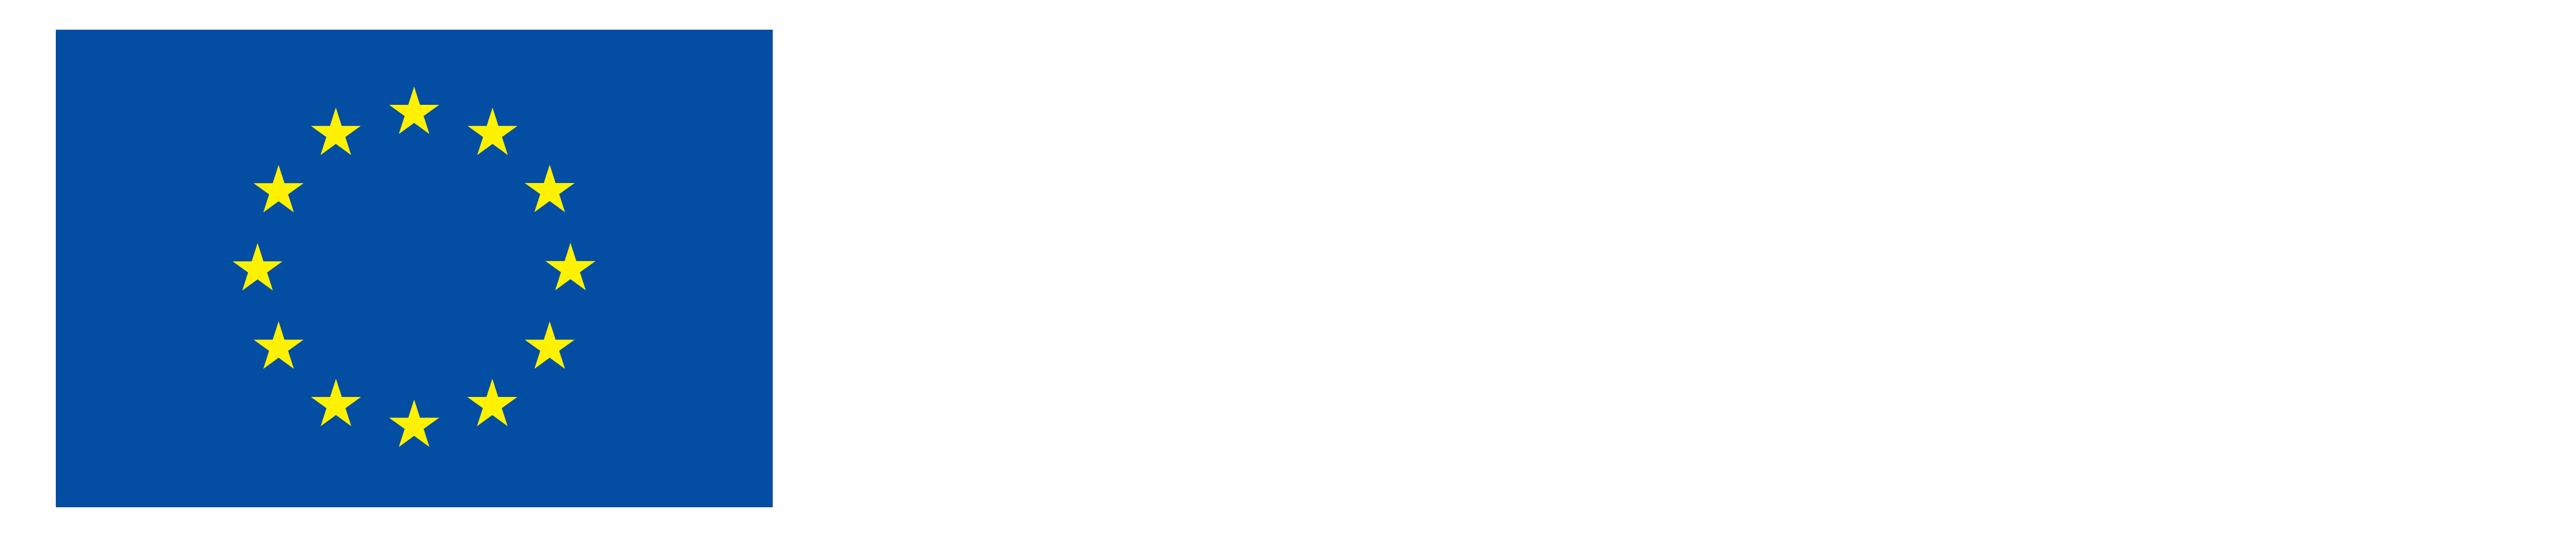 EU logo, co-funded by the European Union